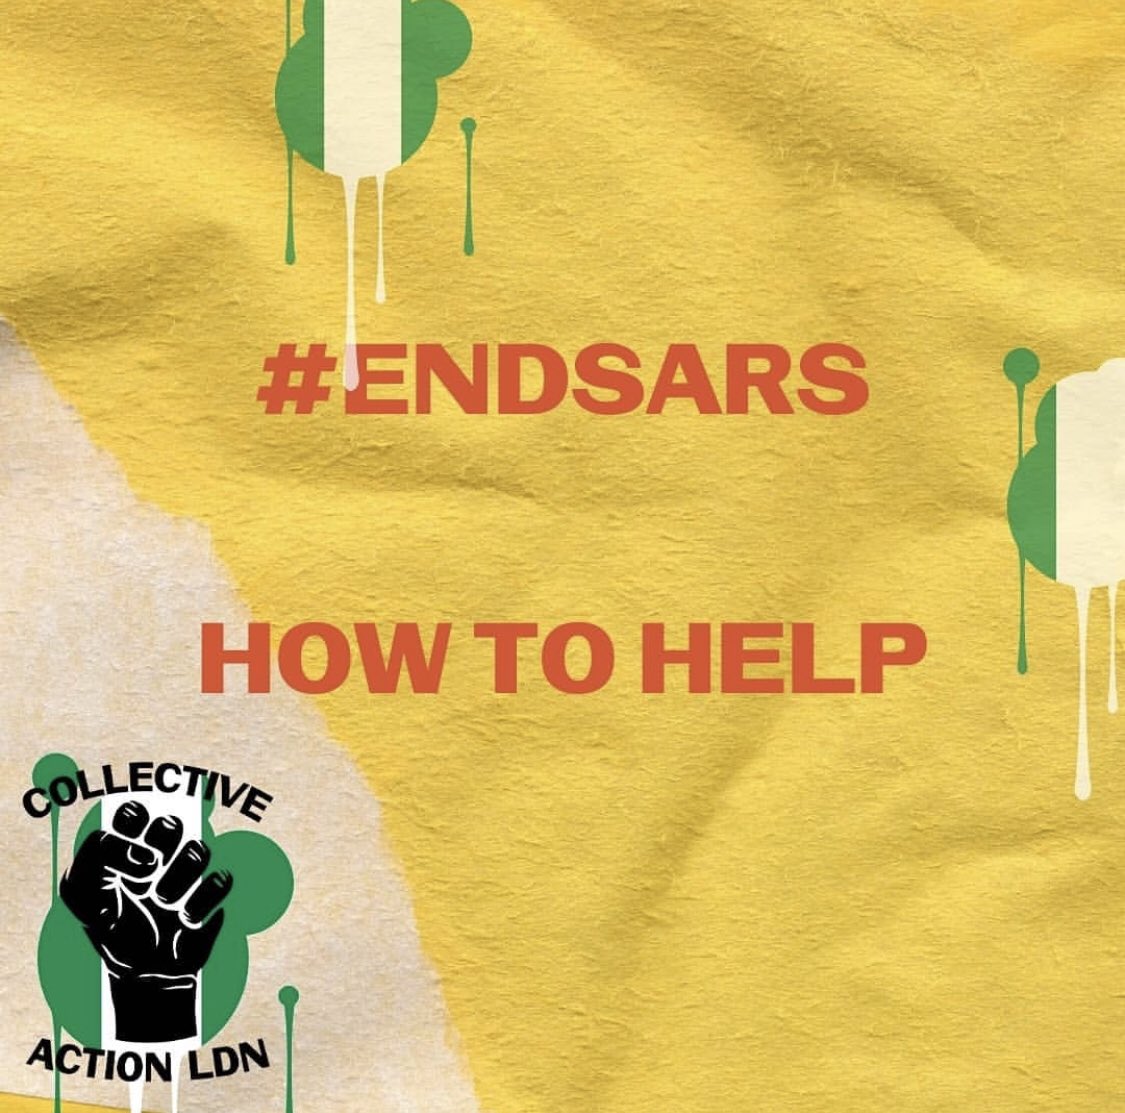 We’ve put together some info on  #EndSARS   and how you can meaningfully help from outside Nigeria. Check the link in our bio, or the thread below, for ways to support.  #EndSWAT  #LekkiMassacre